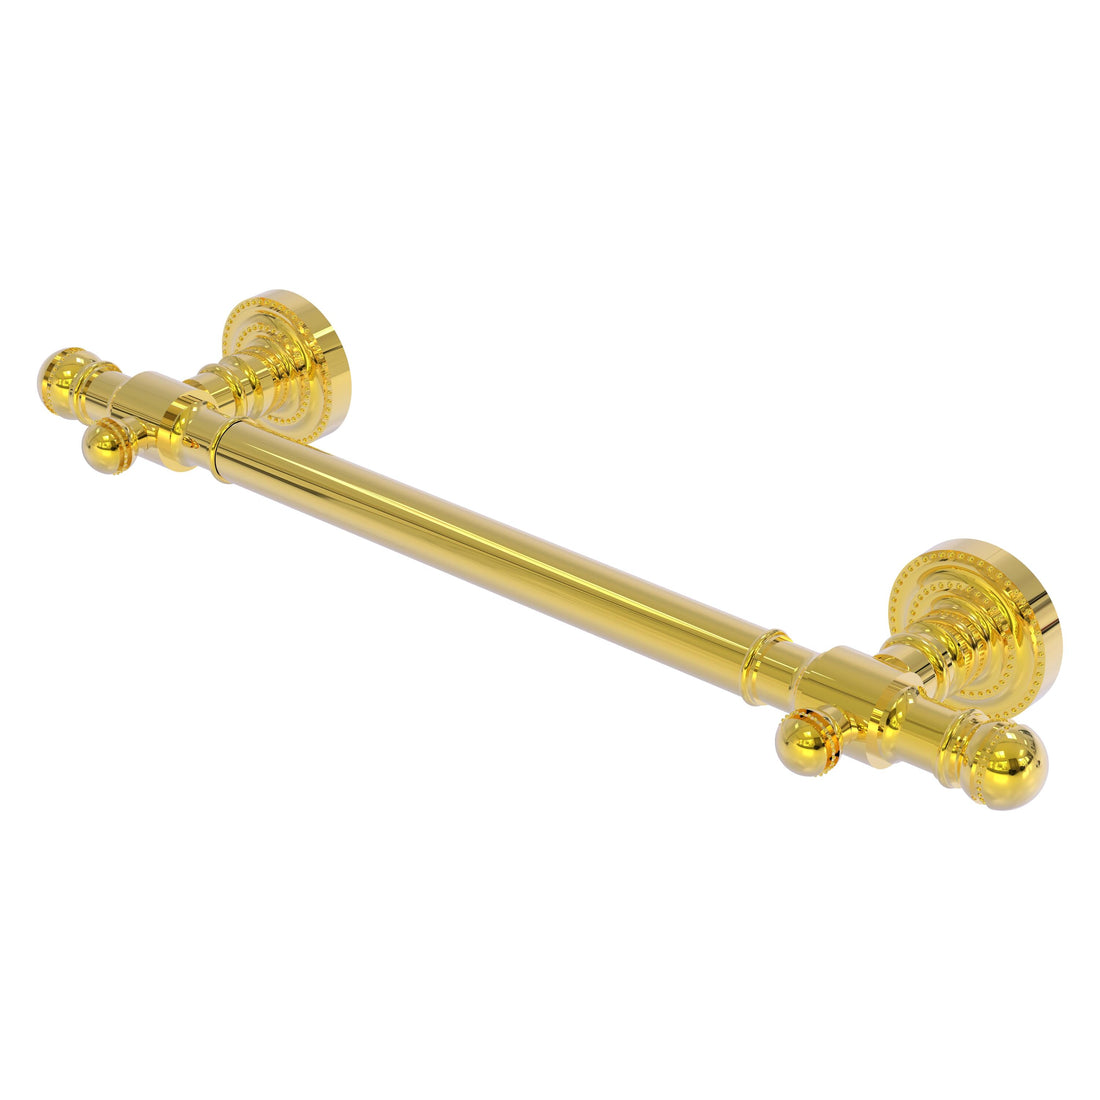 Brass grab bar with reeded surface grip